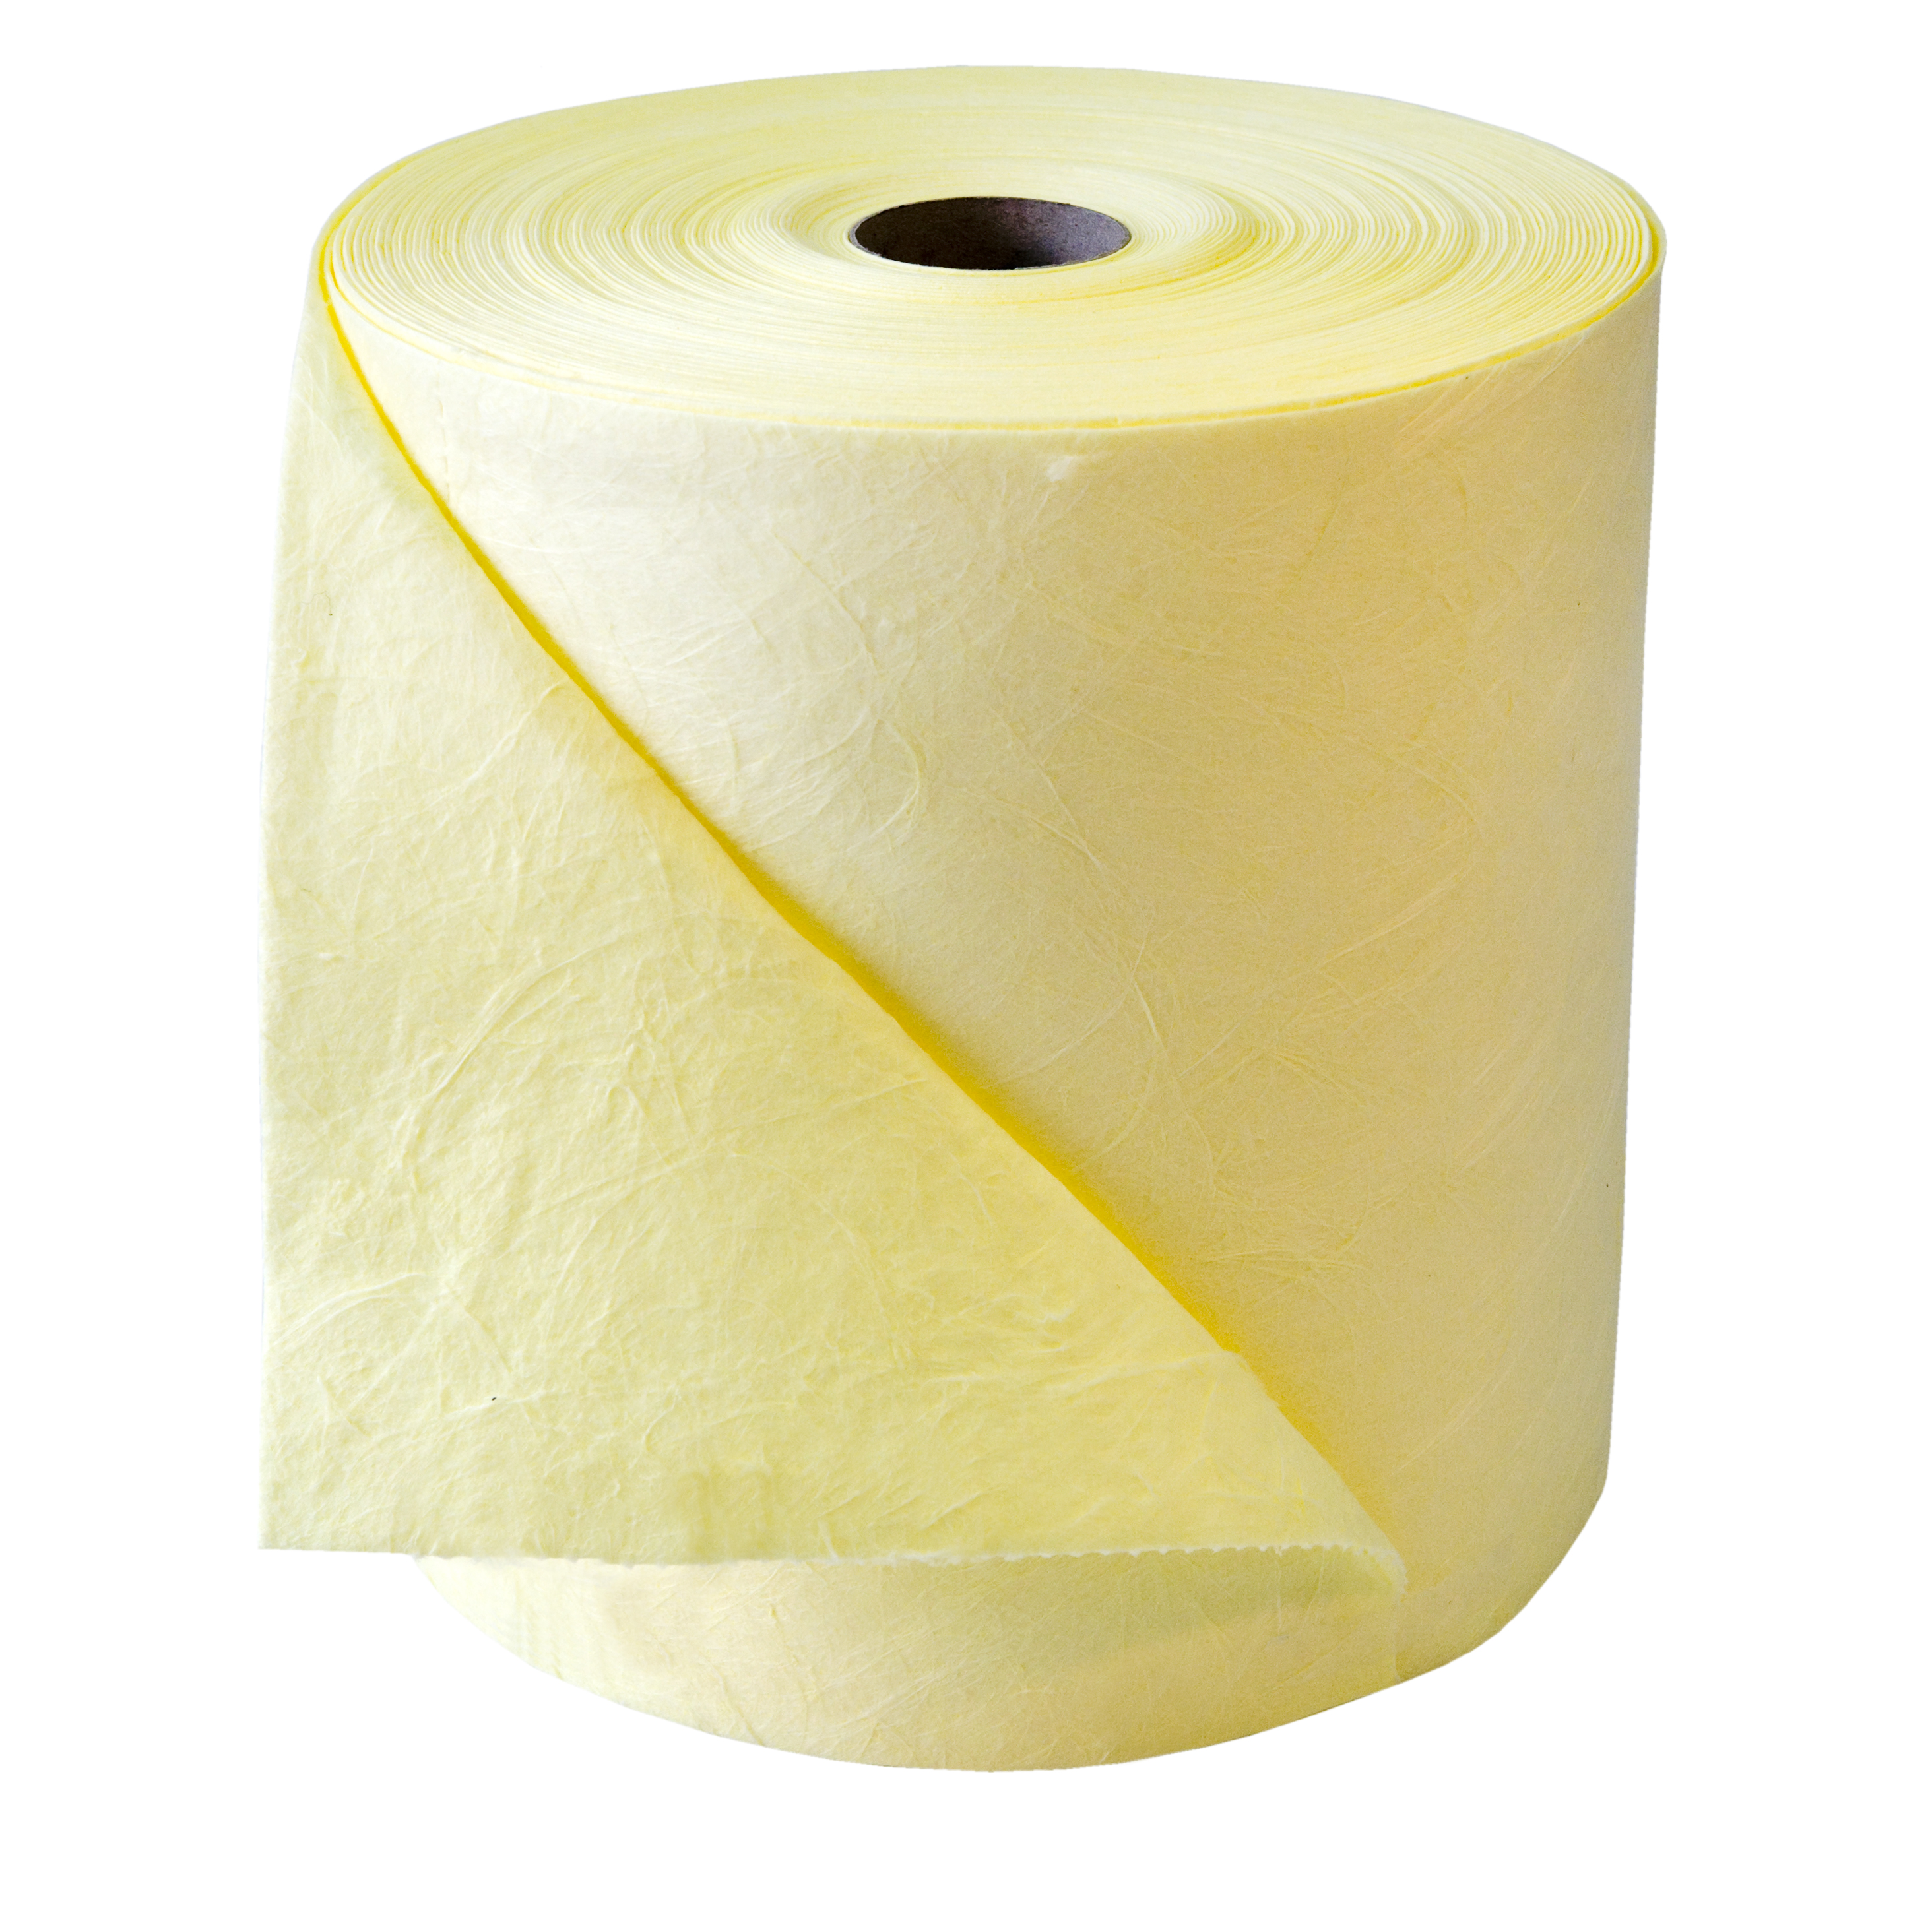 ICOSORB&#174; FIRST LIGHT yellow as a roll